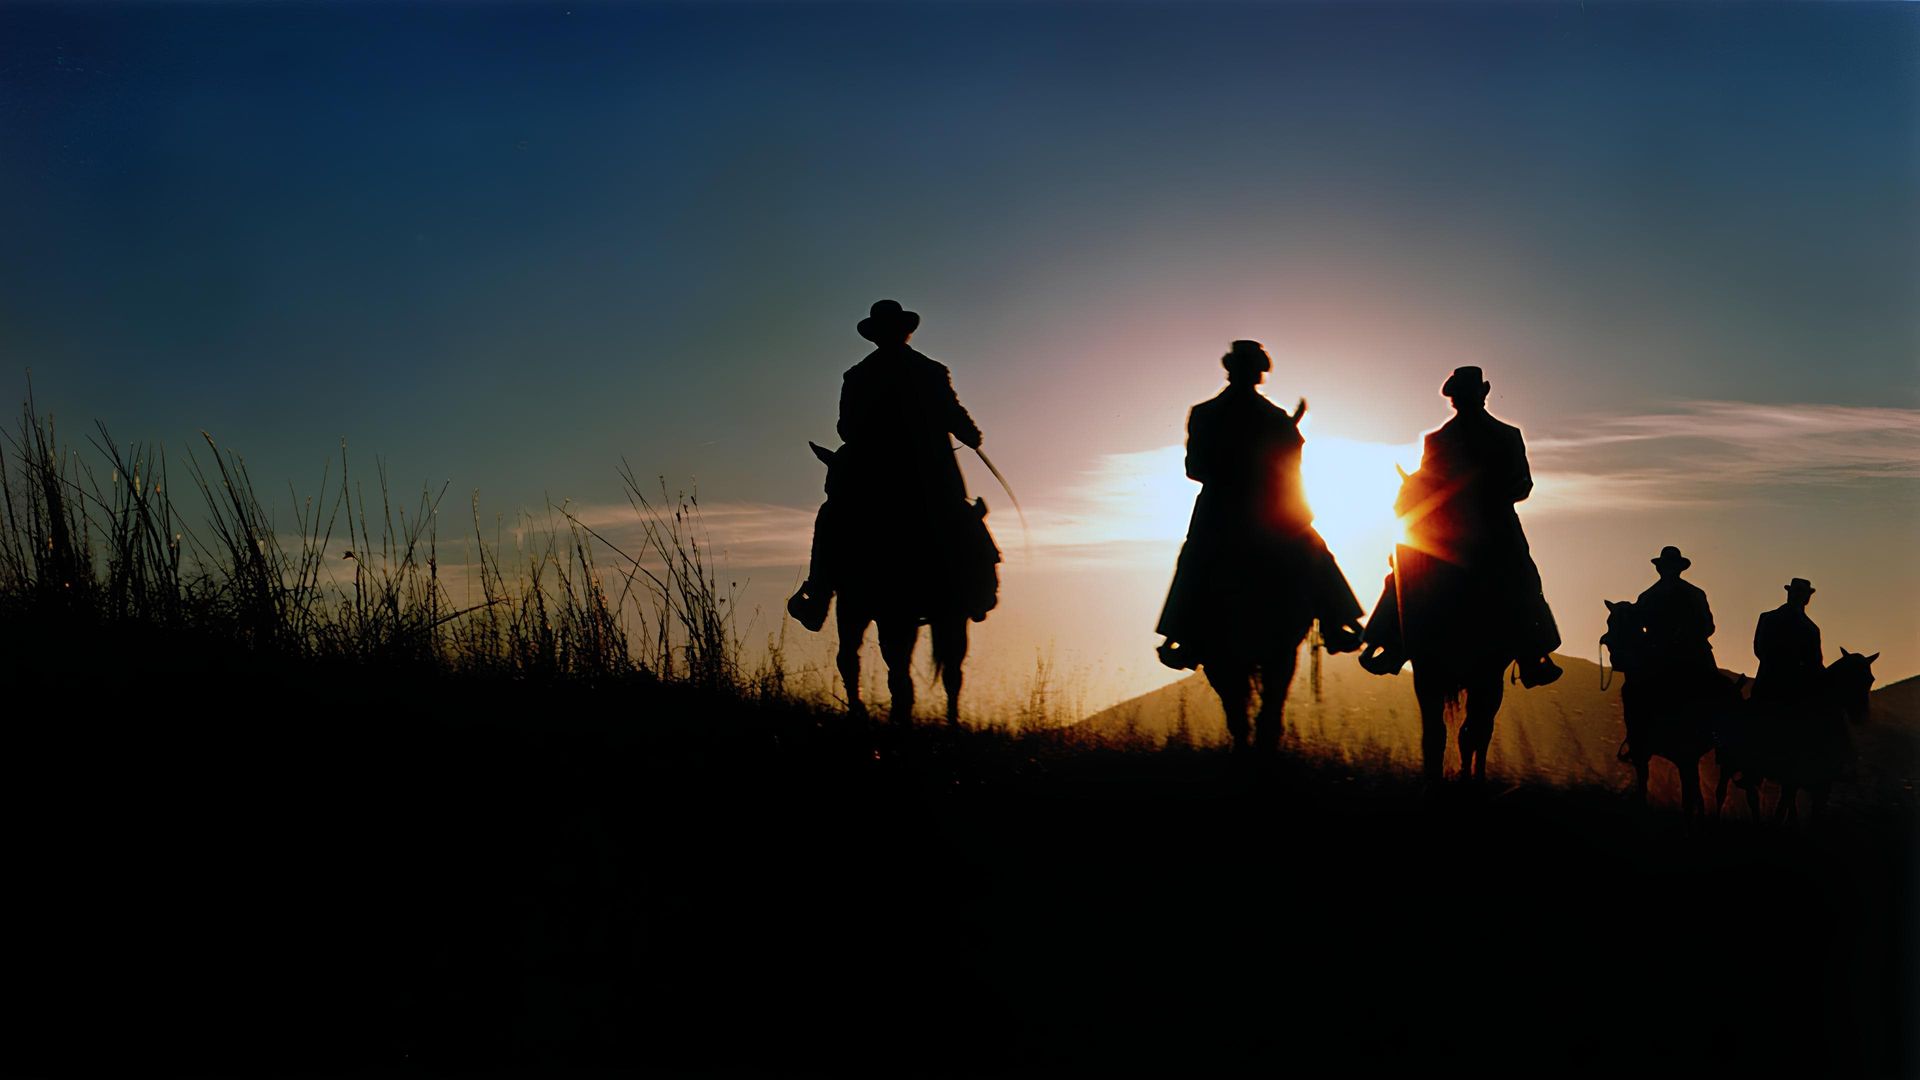 The Long Riders background